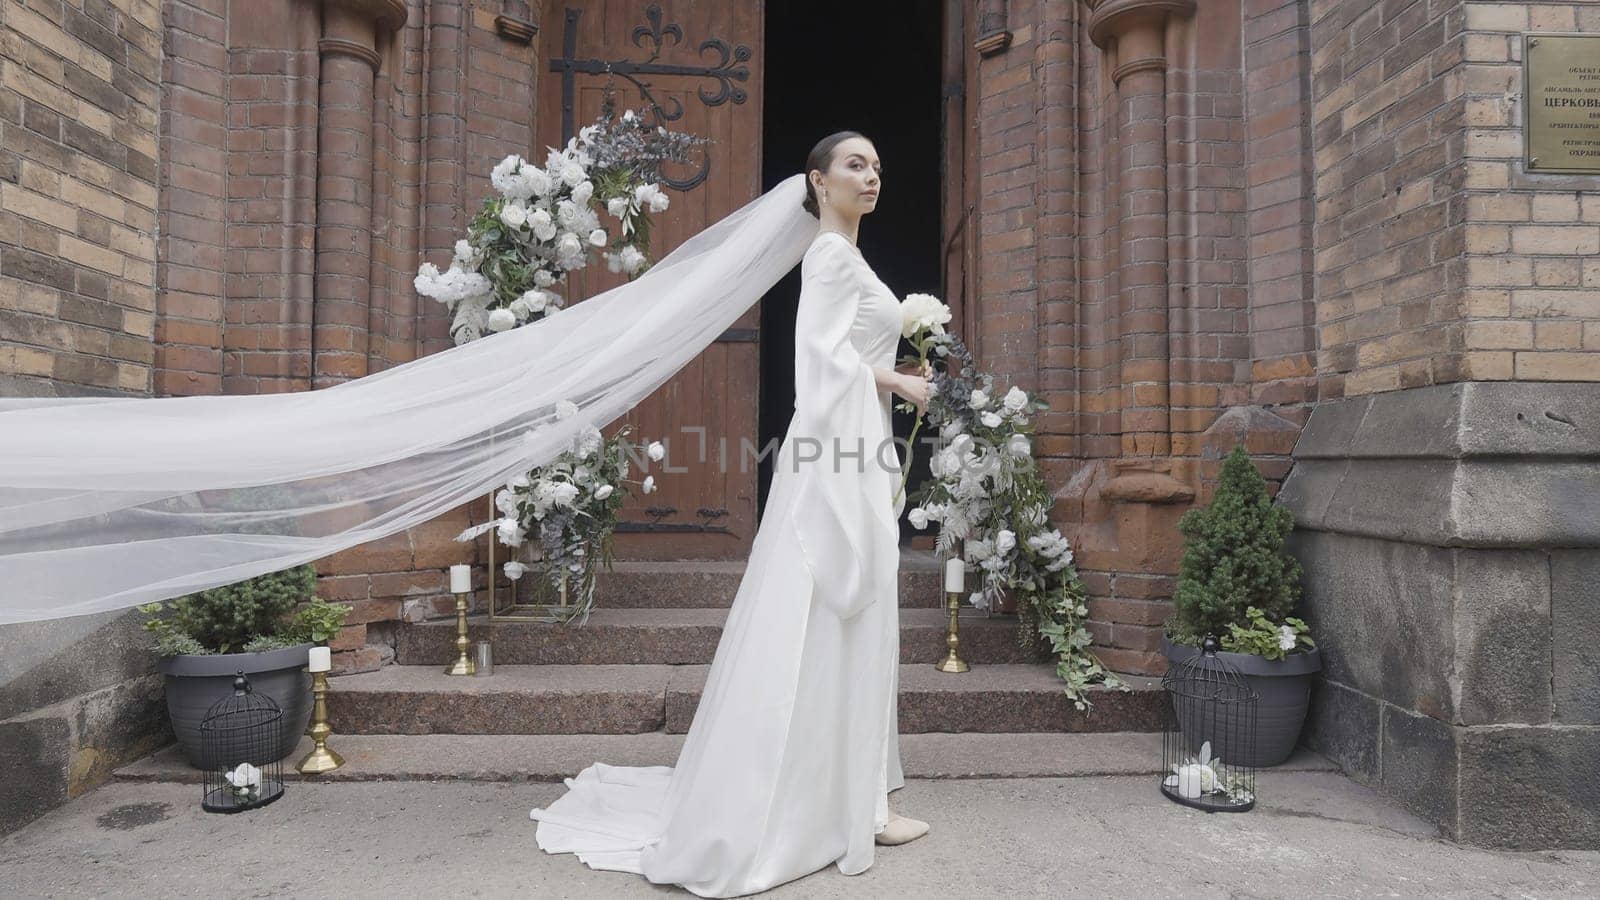 Elegant bride at entrance to church. Action. Luxurious bridal veil with bouquet at church. Beautiful bride's outfit with long veil.